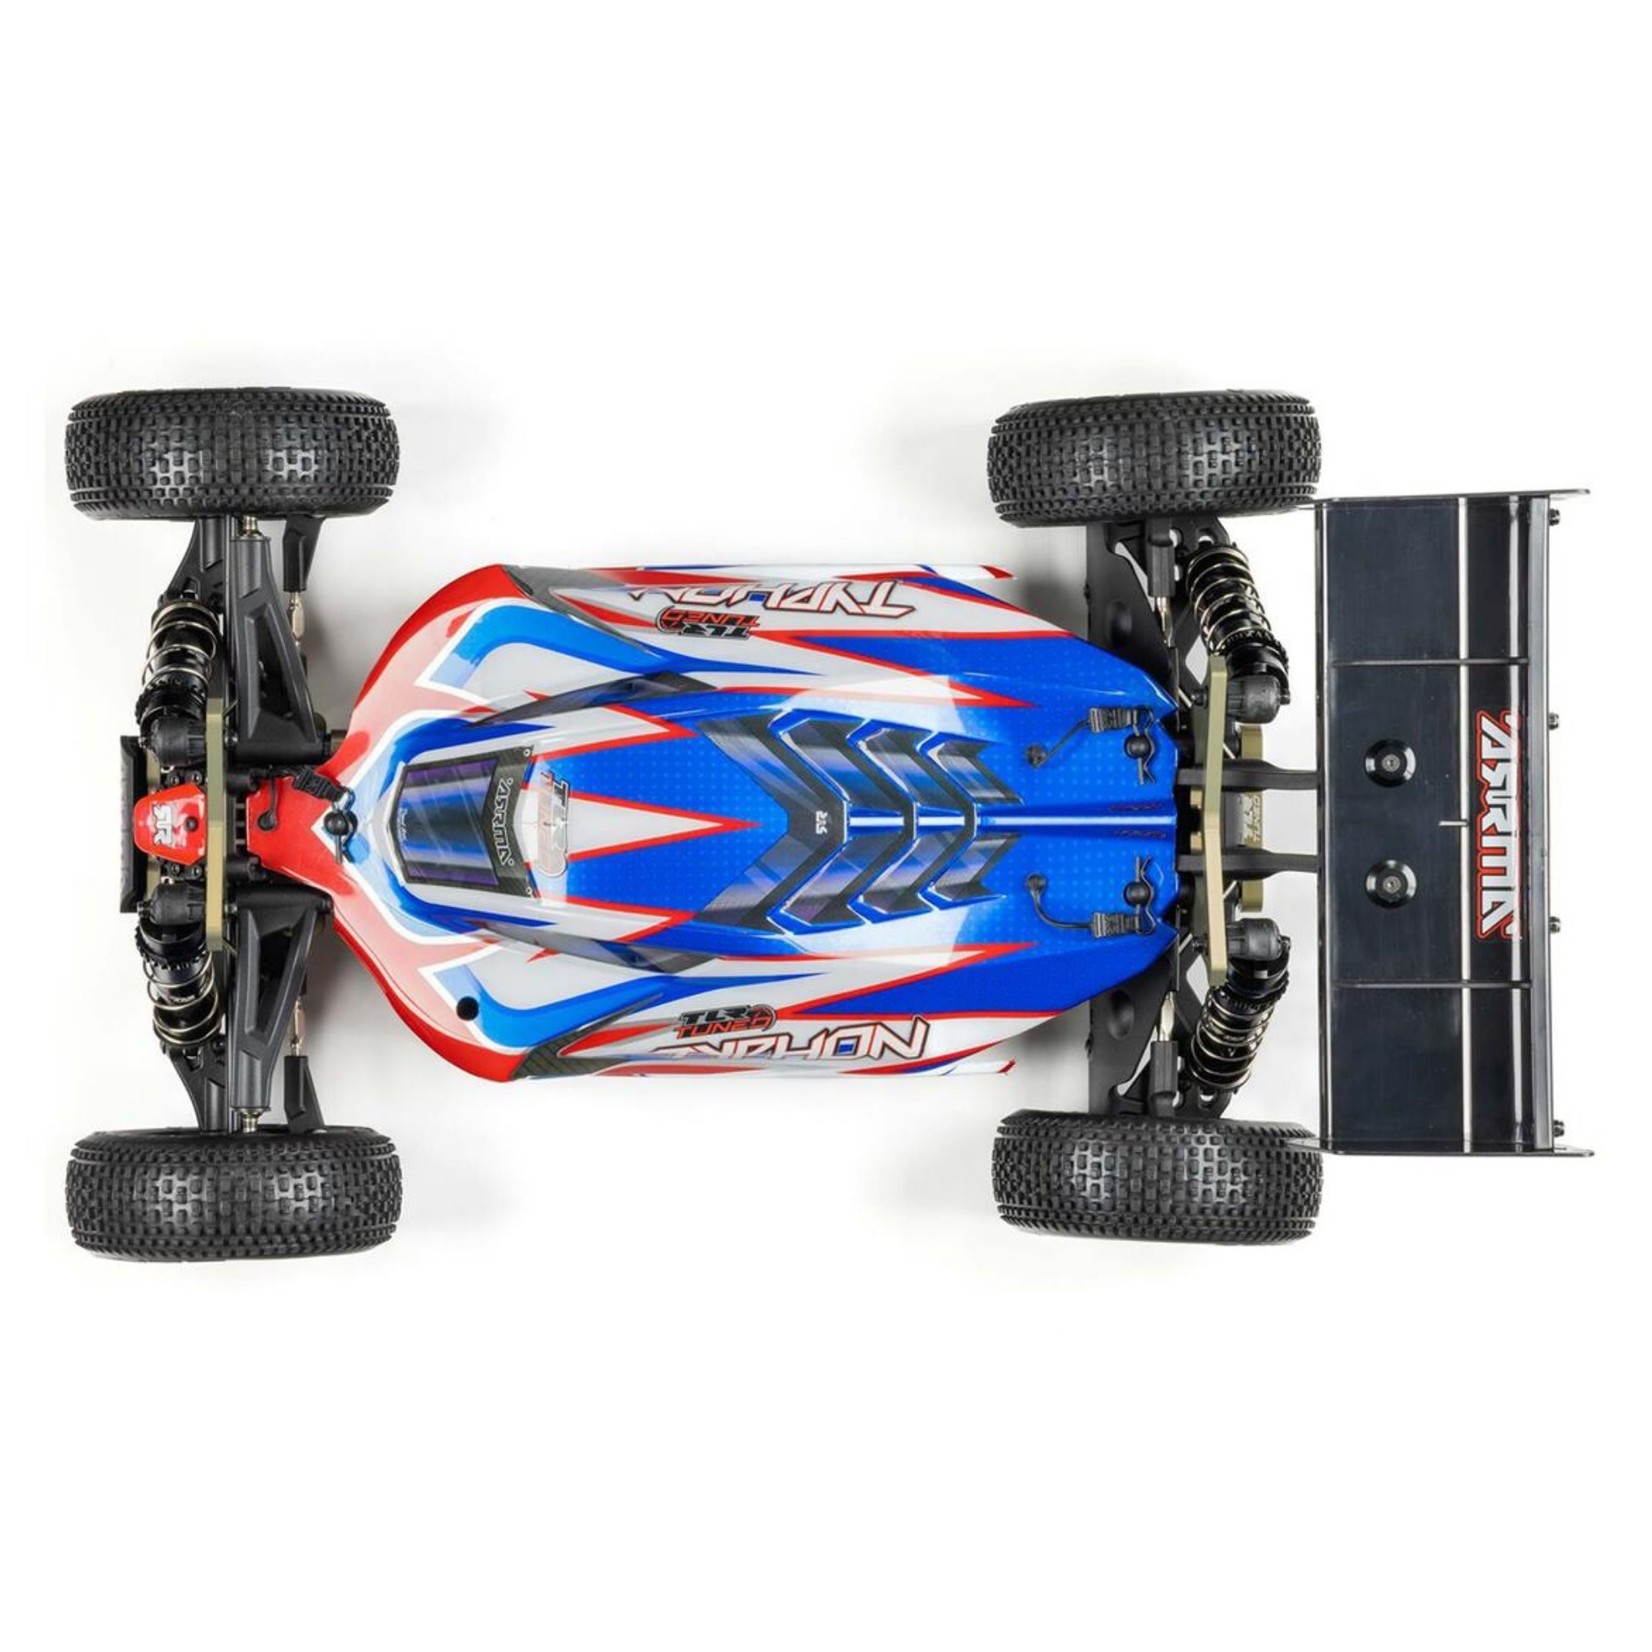 ARRMA Arrma Typhon 6S "TLR Tuned" 1/8 4WD RTR Buggy (Red/Blue) #ARA8406